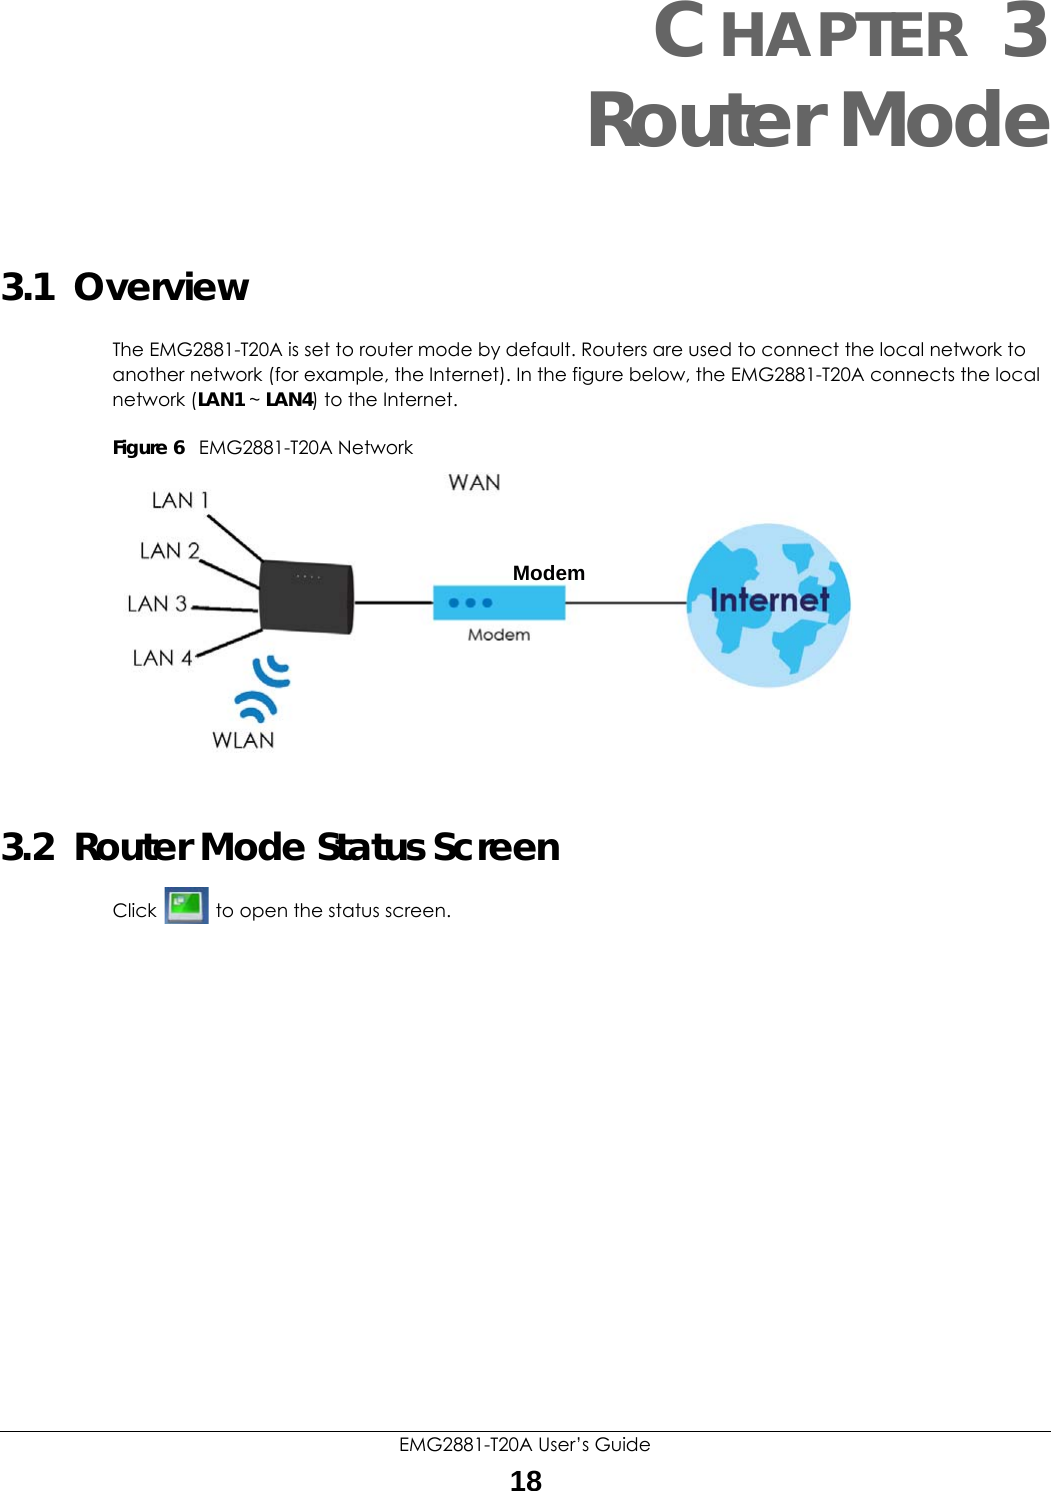 EMG2881-T20A User’s Guide18CHAPTER 3Router Mode3.1  OverviewThe EMG2881-T20A is set to router mode by default. Routers are used to connect the local network to another network (for example, the Internet). In the figure below, the EMG2881-T20A connects the local network (LAN1 ~ LAN4) to the Internet.Figure 6   EMG2881-T20A Network3.2  Router Mode Status ScreenClick   to open the status screen. Modem